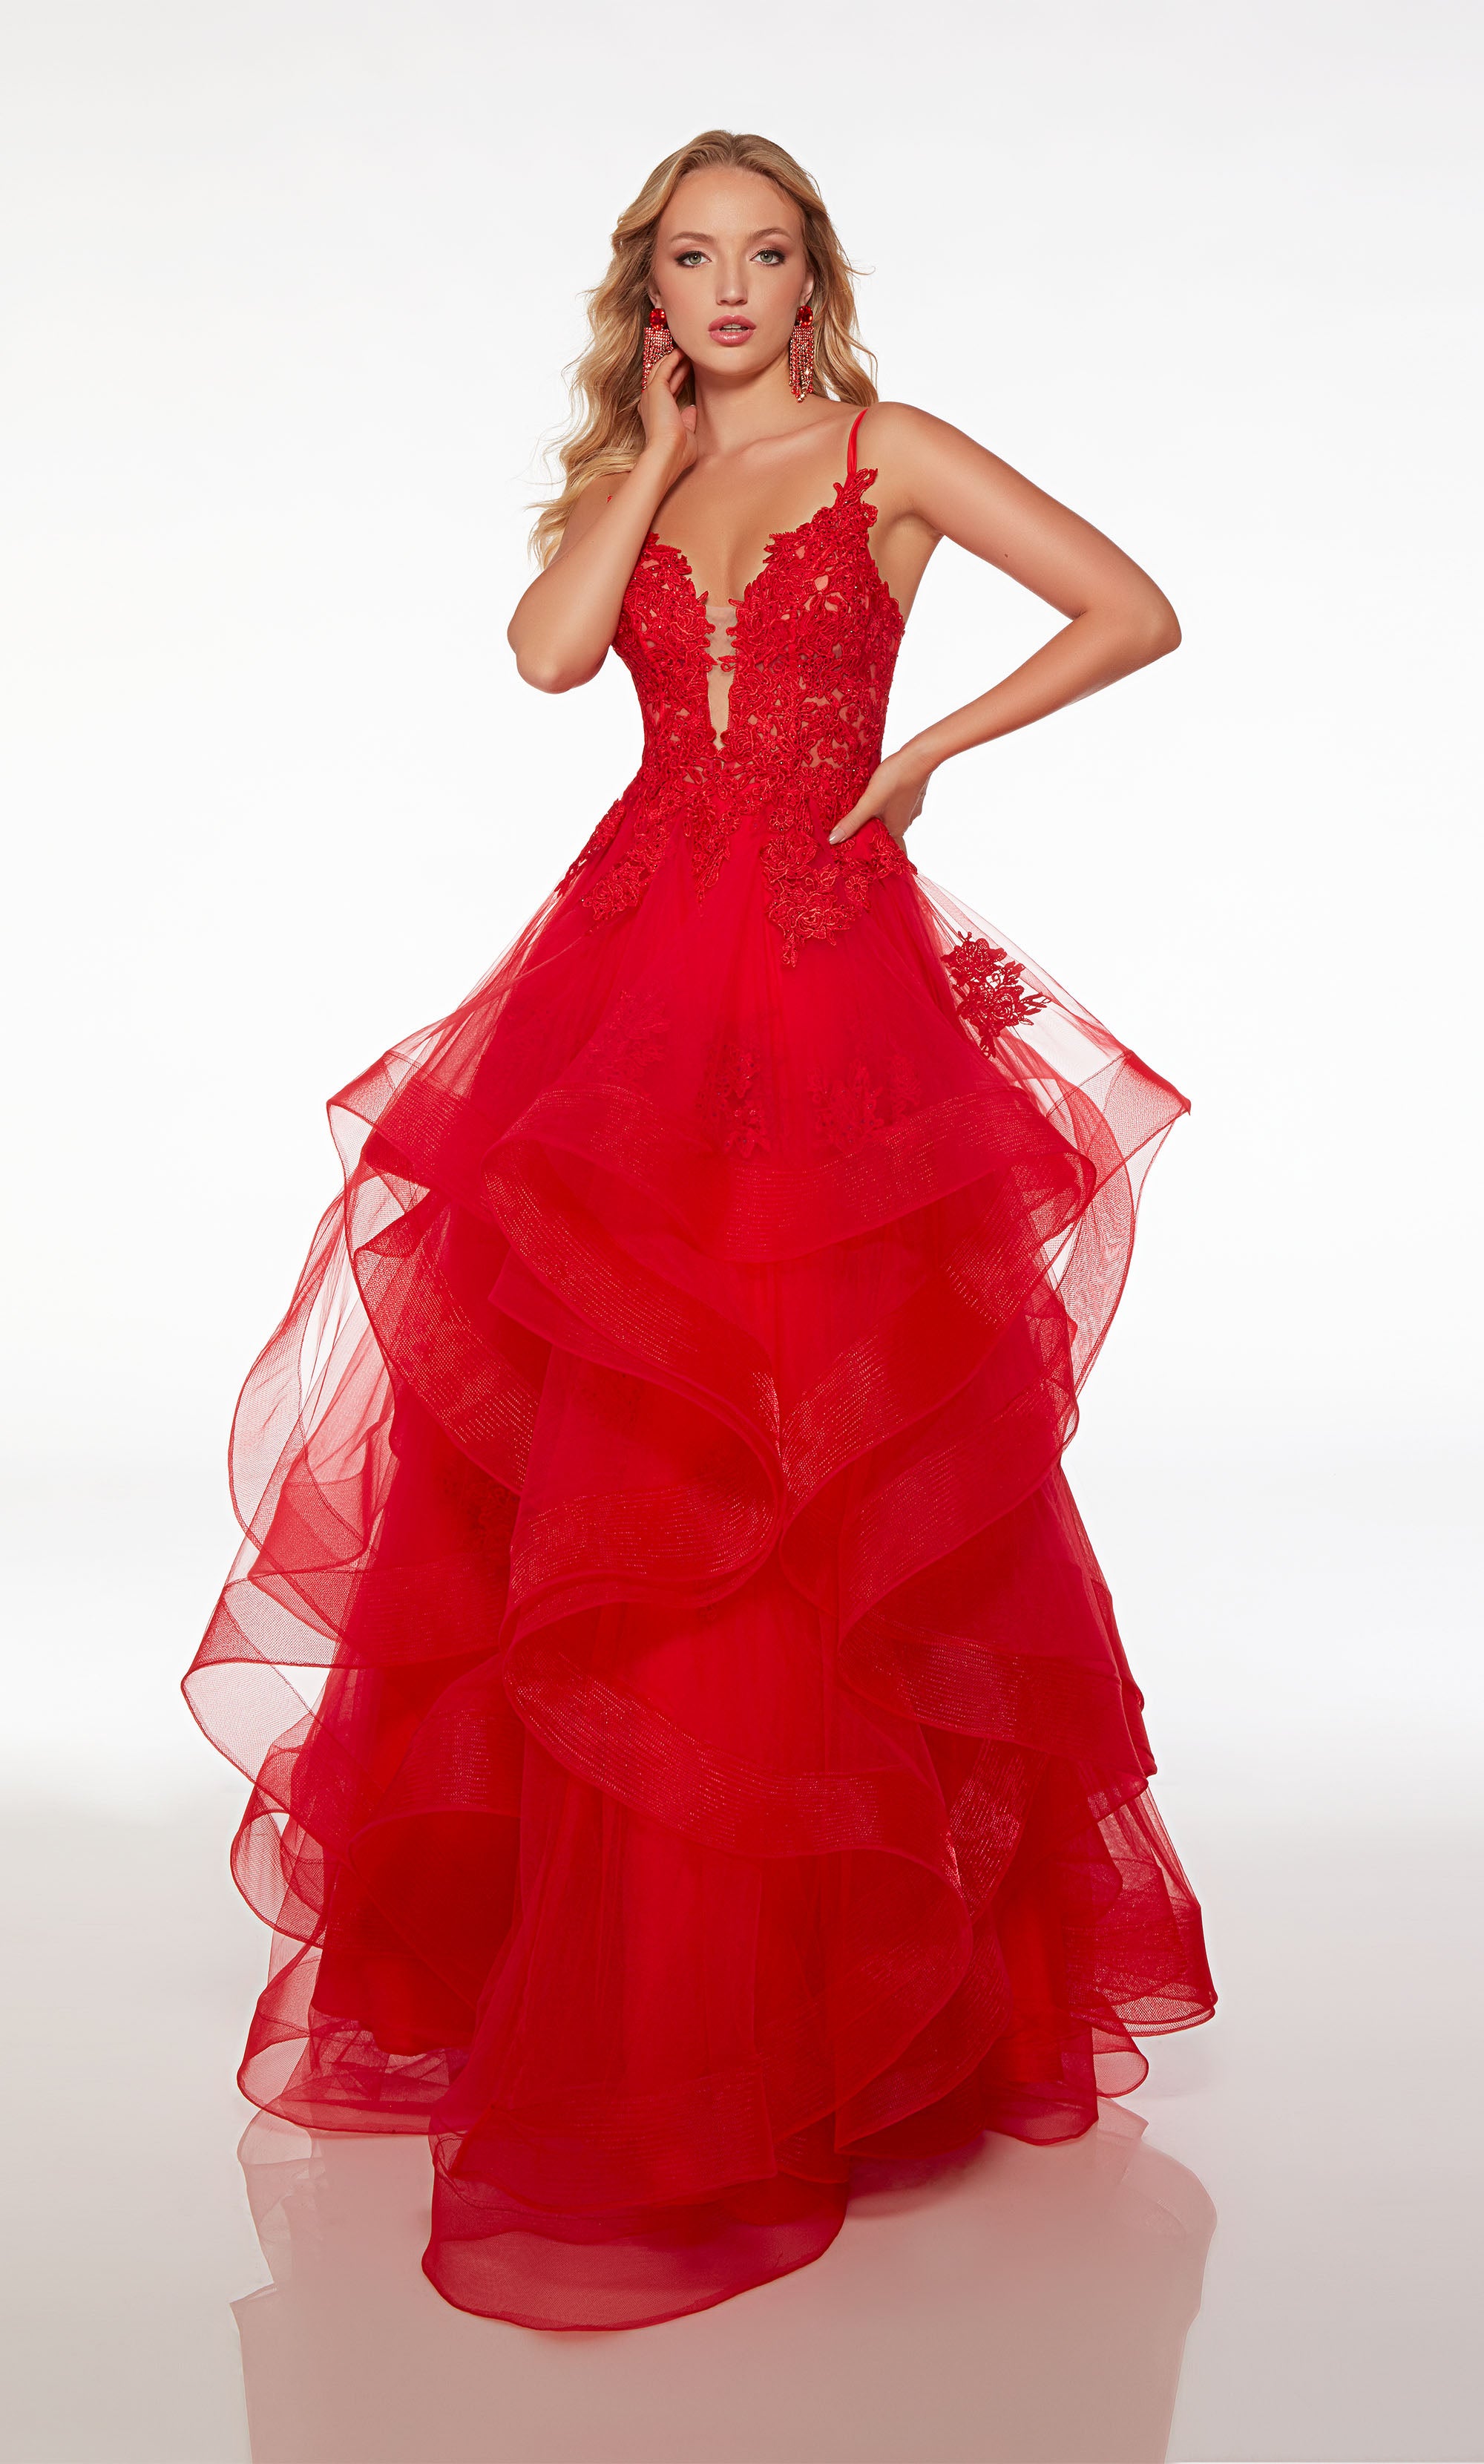 Orange Prom Dresses - Gowns for Your Special Night